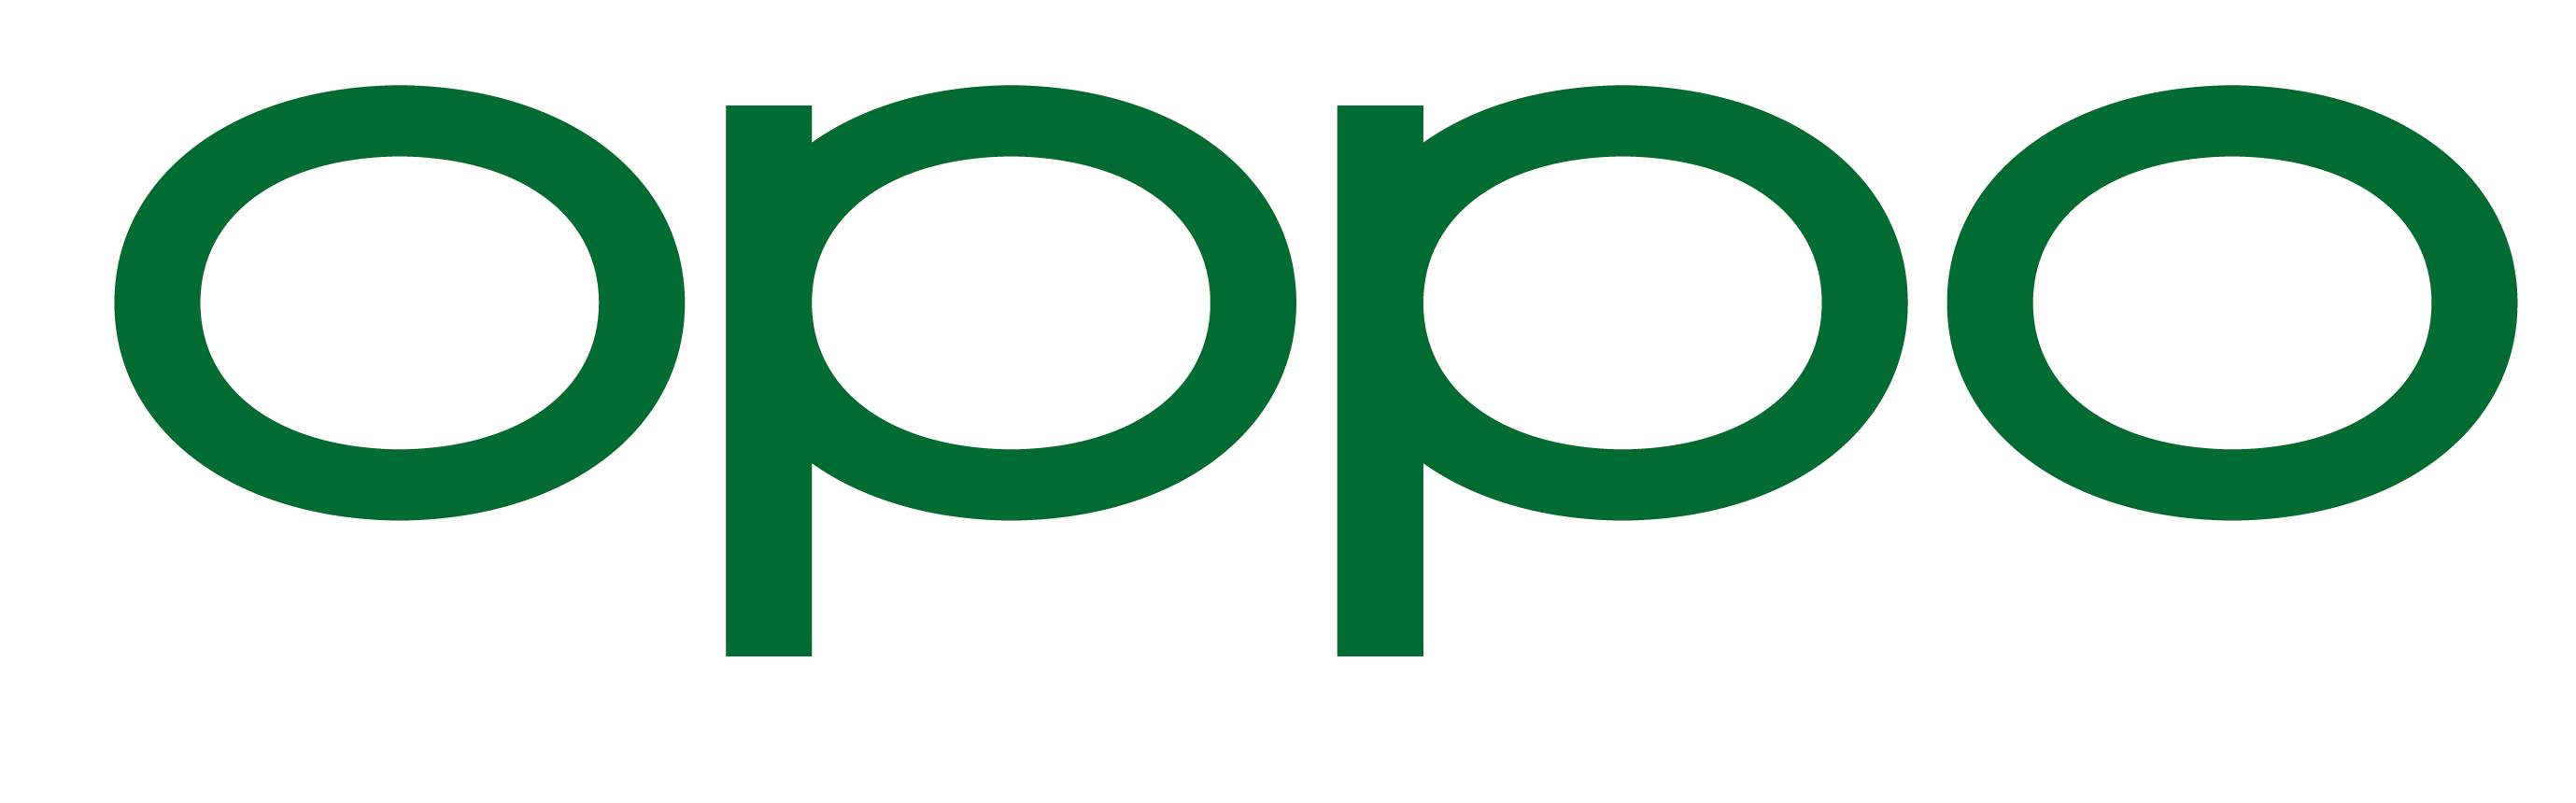 File:OPPO LOGO 2019.png - Wikimedia Commons